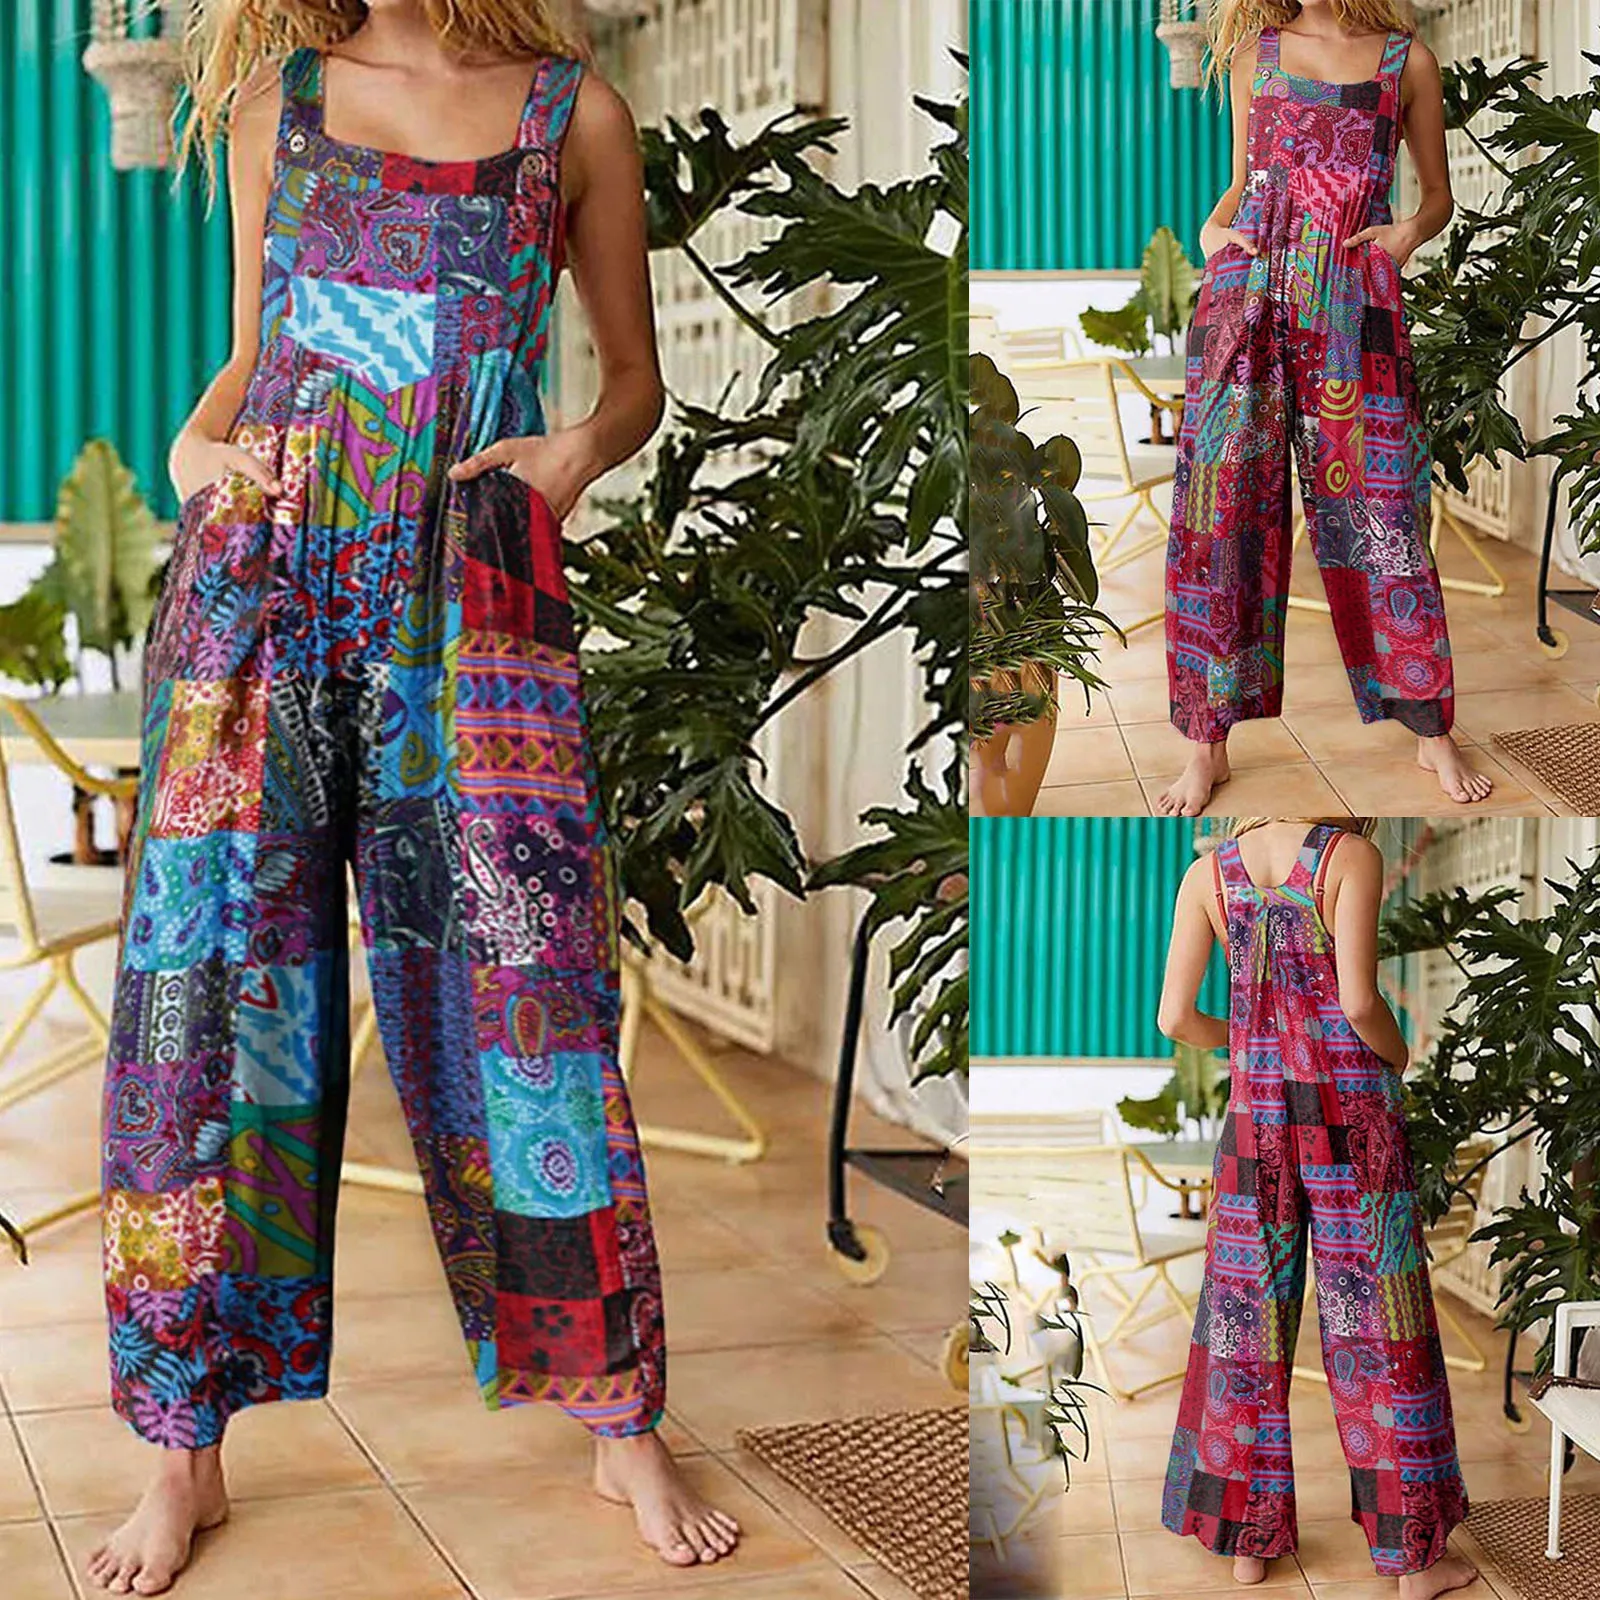 Women-Ethnic-Style-Jumpsuits-Summer-Overalls-Multicolor-Square-Neck-Sleeveless-Casual-Rompers-with-Pockets-for-Girls